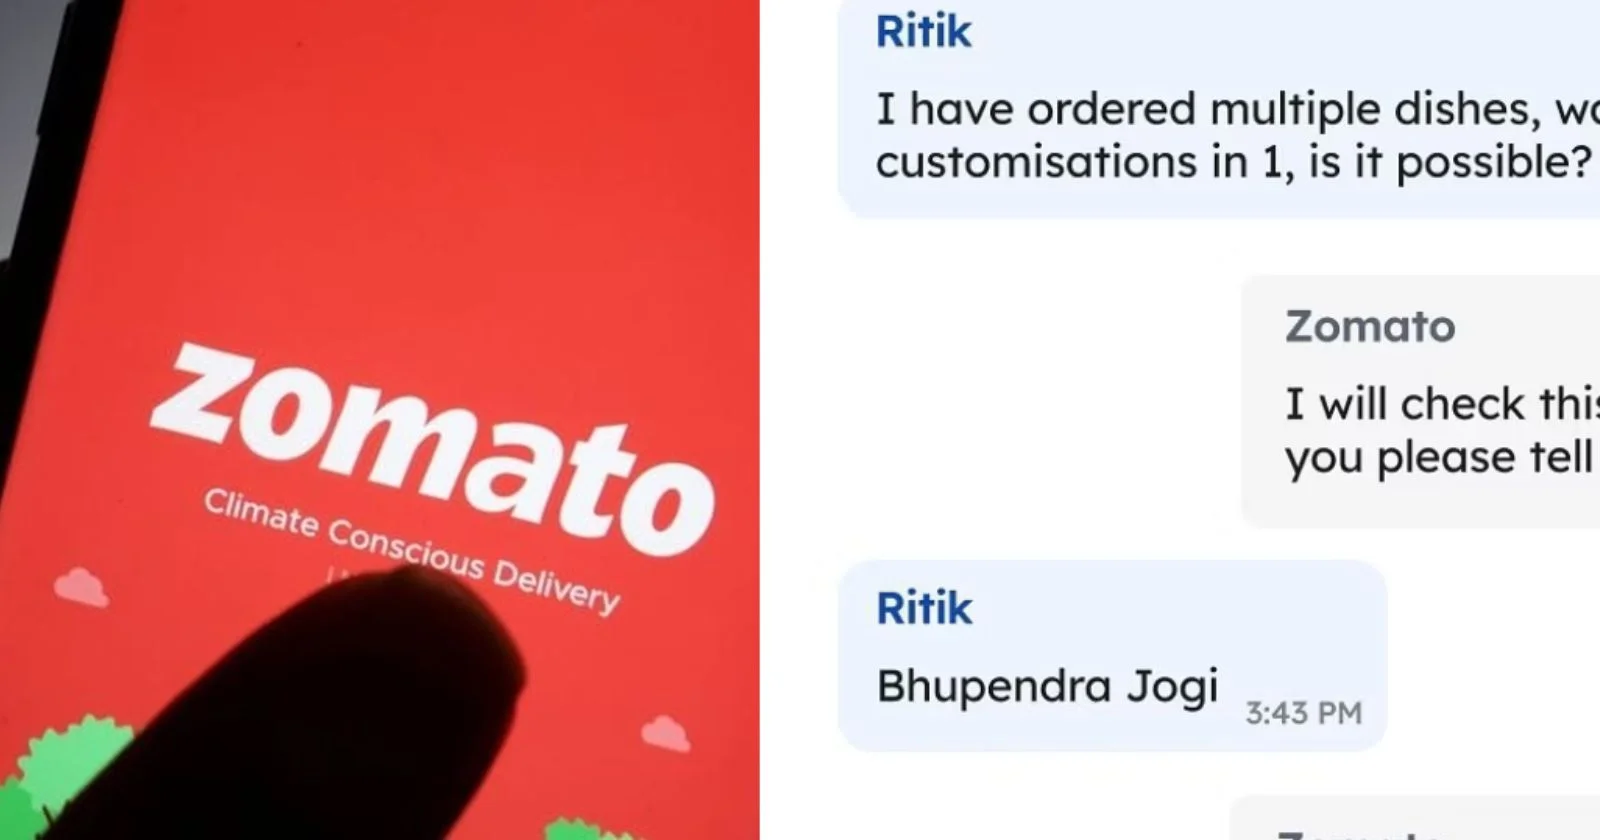 Zomato Customer Support Replies With A Hilarious Meme When The Customer Reveals His Name As Bhupendra Jogi